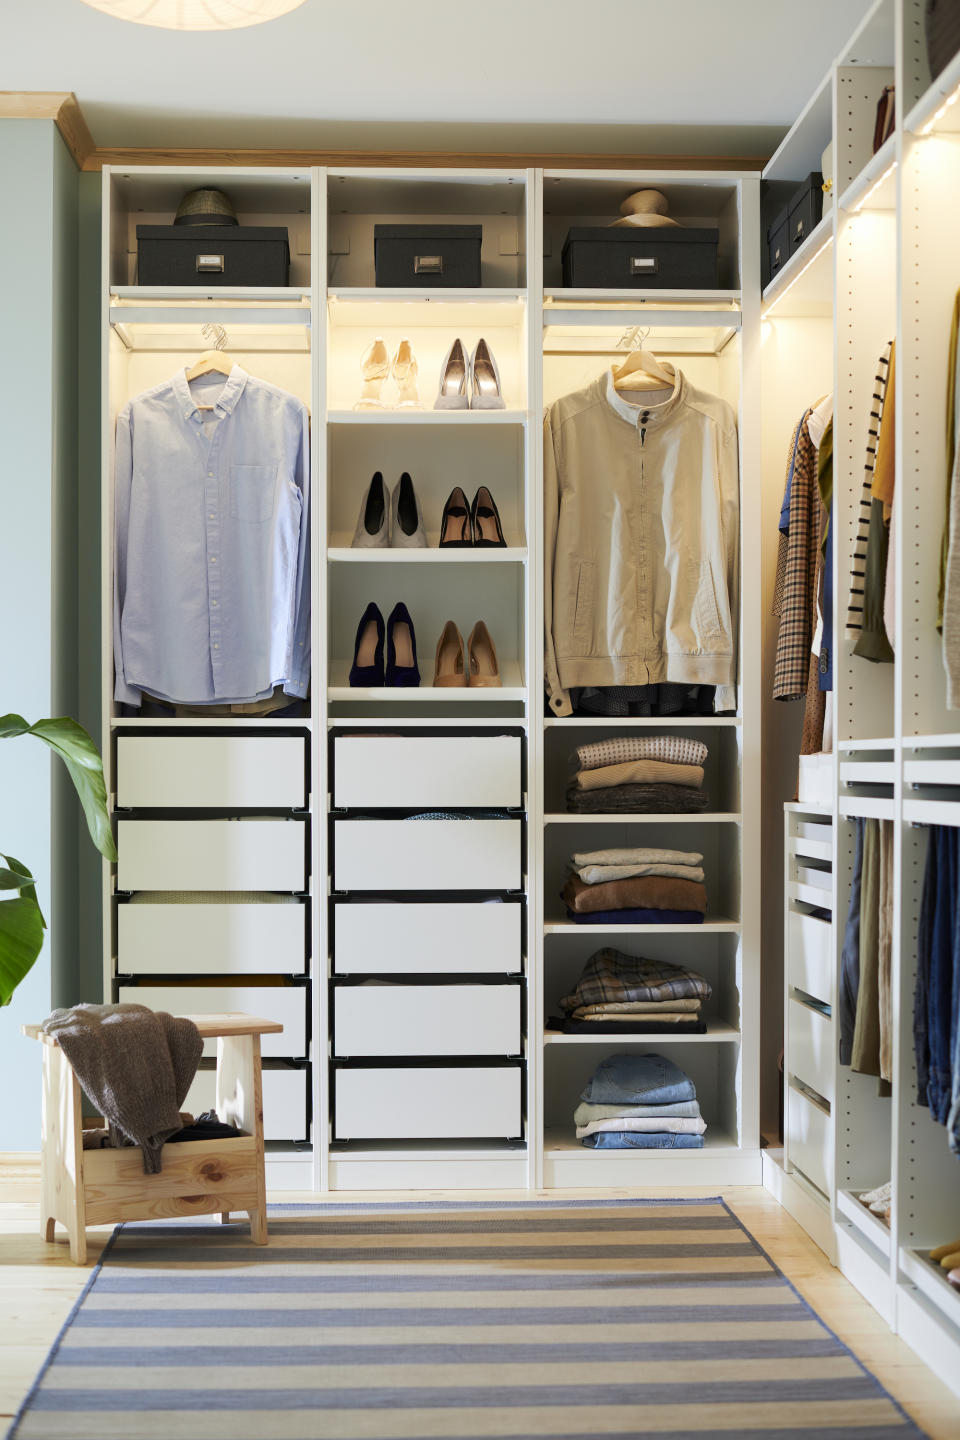 <p> One consideration when designing your own walk-in closet is to choose what combinations of storage will work best. Do you prefer to have more hanging items or do you like to keep things neatly folded in drawers or on shelves? This Ikea Pax combination shows you how to use both successfully within this corner closet.&#xA0; </p>